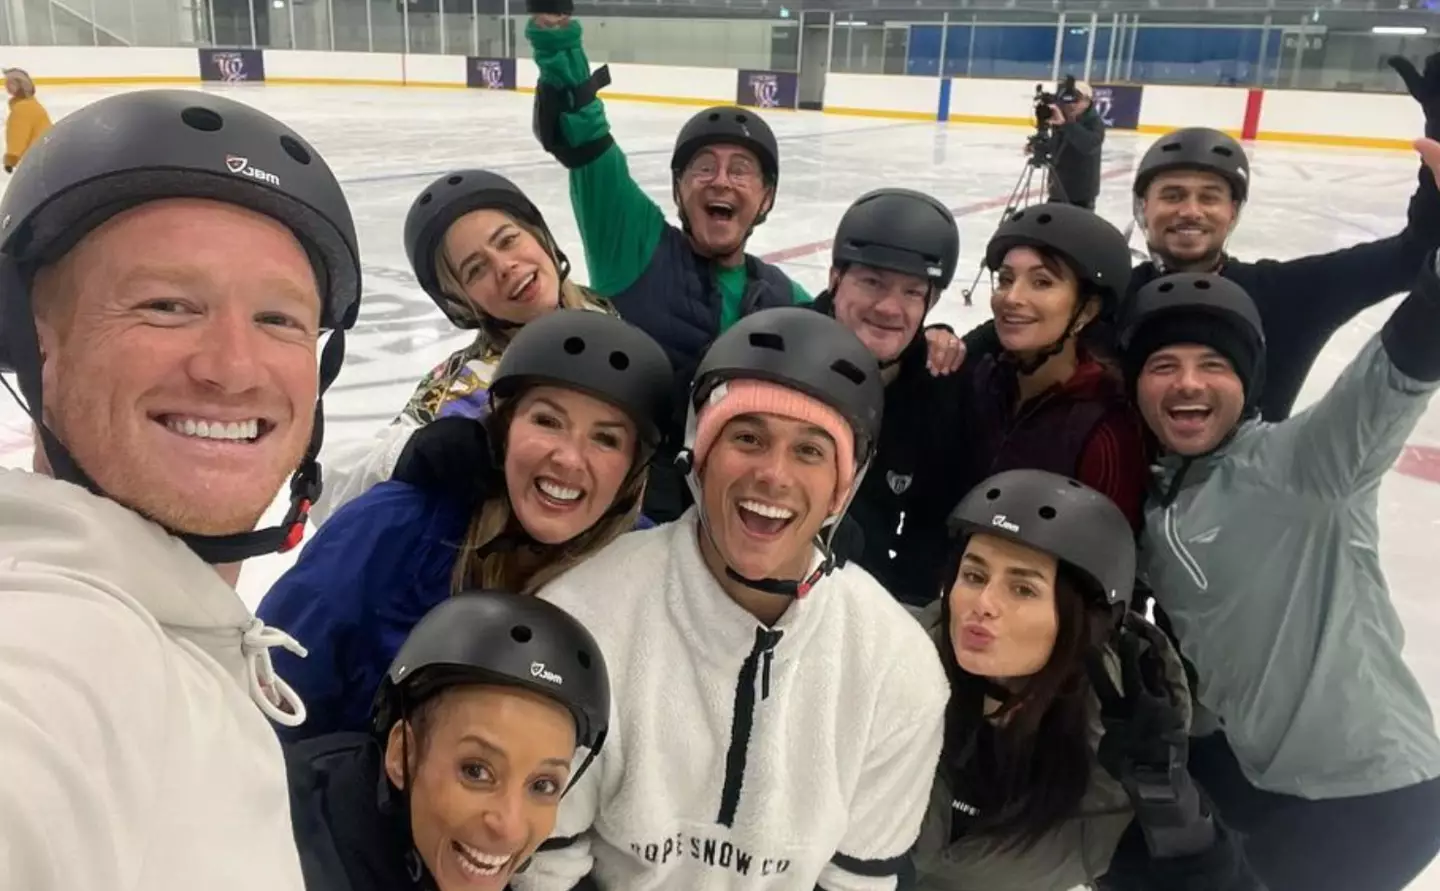 Miles with his co-stars practicing on the ice.